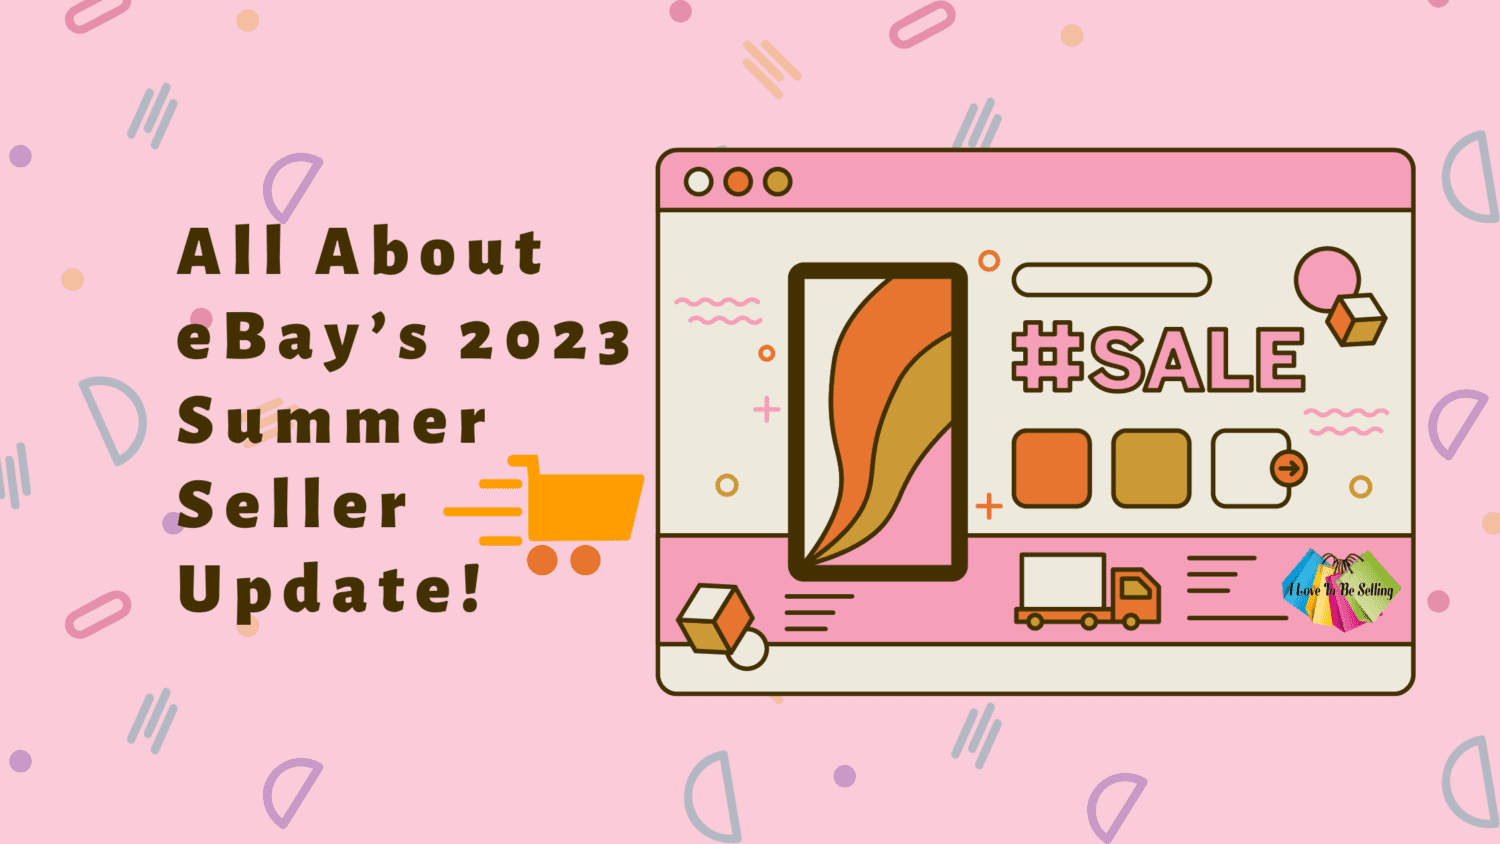 All About eBay’s 2023 Summer Seller Update! I Love To Be Selling